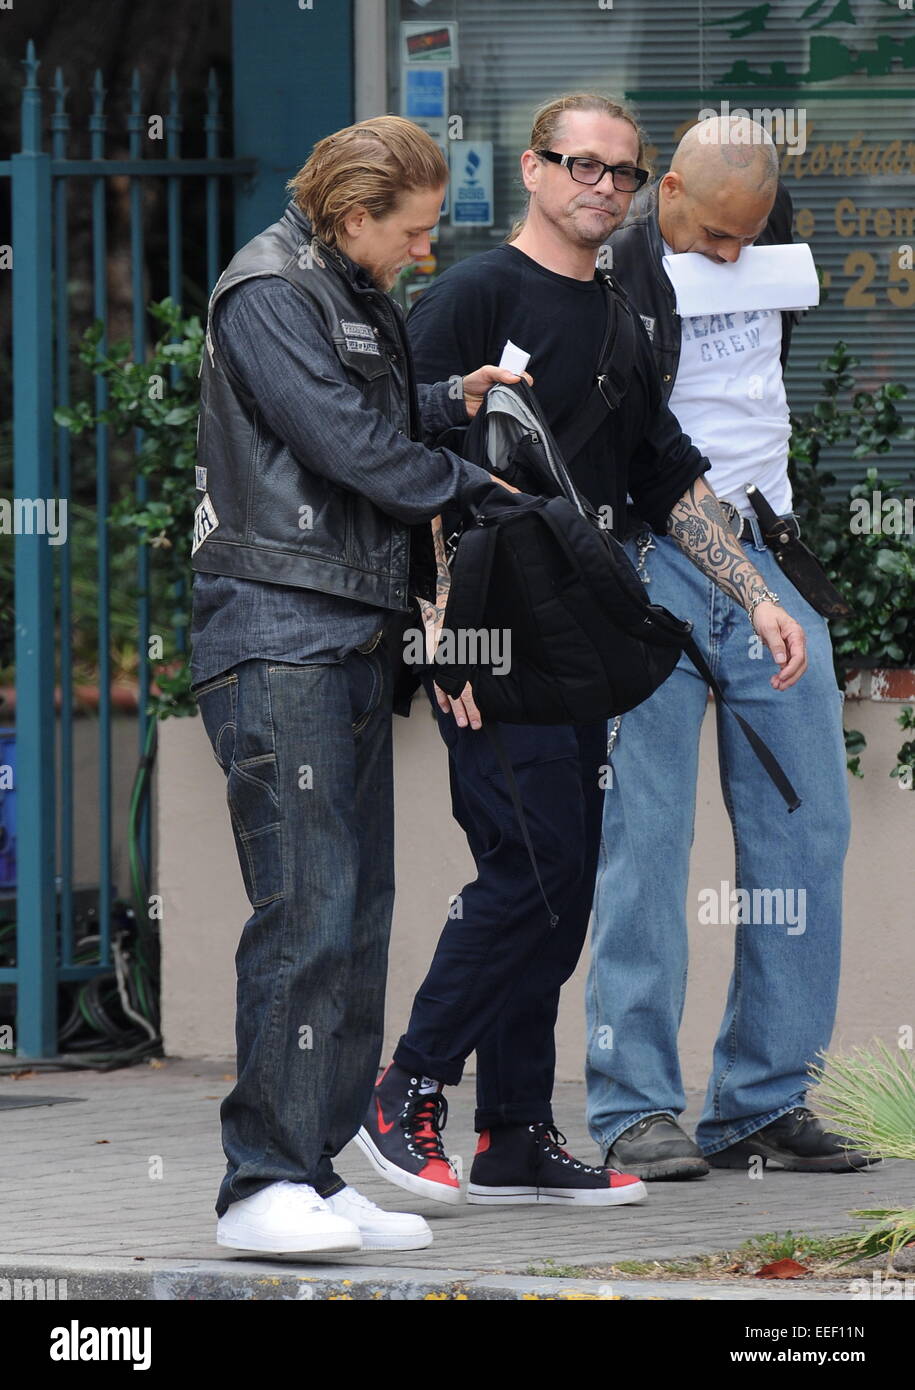 Actor Charlie Hunnam goes through his lines before filming a new episode of  the hit tv show Sons Of Anarchy filming in Los Angeles. Charlie was also  seen with producer Kurt Sutter.